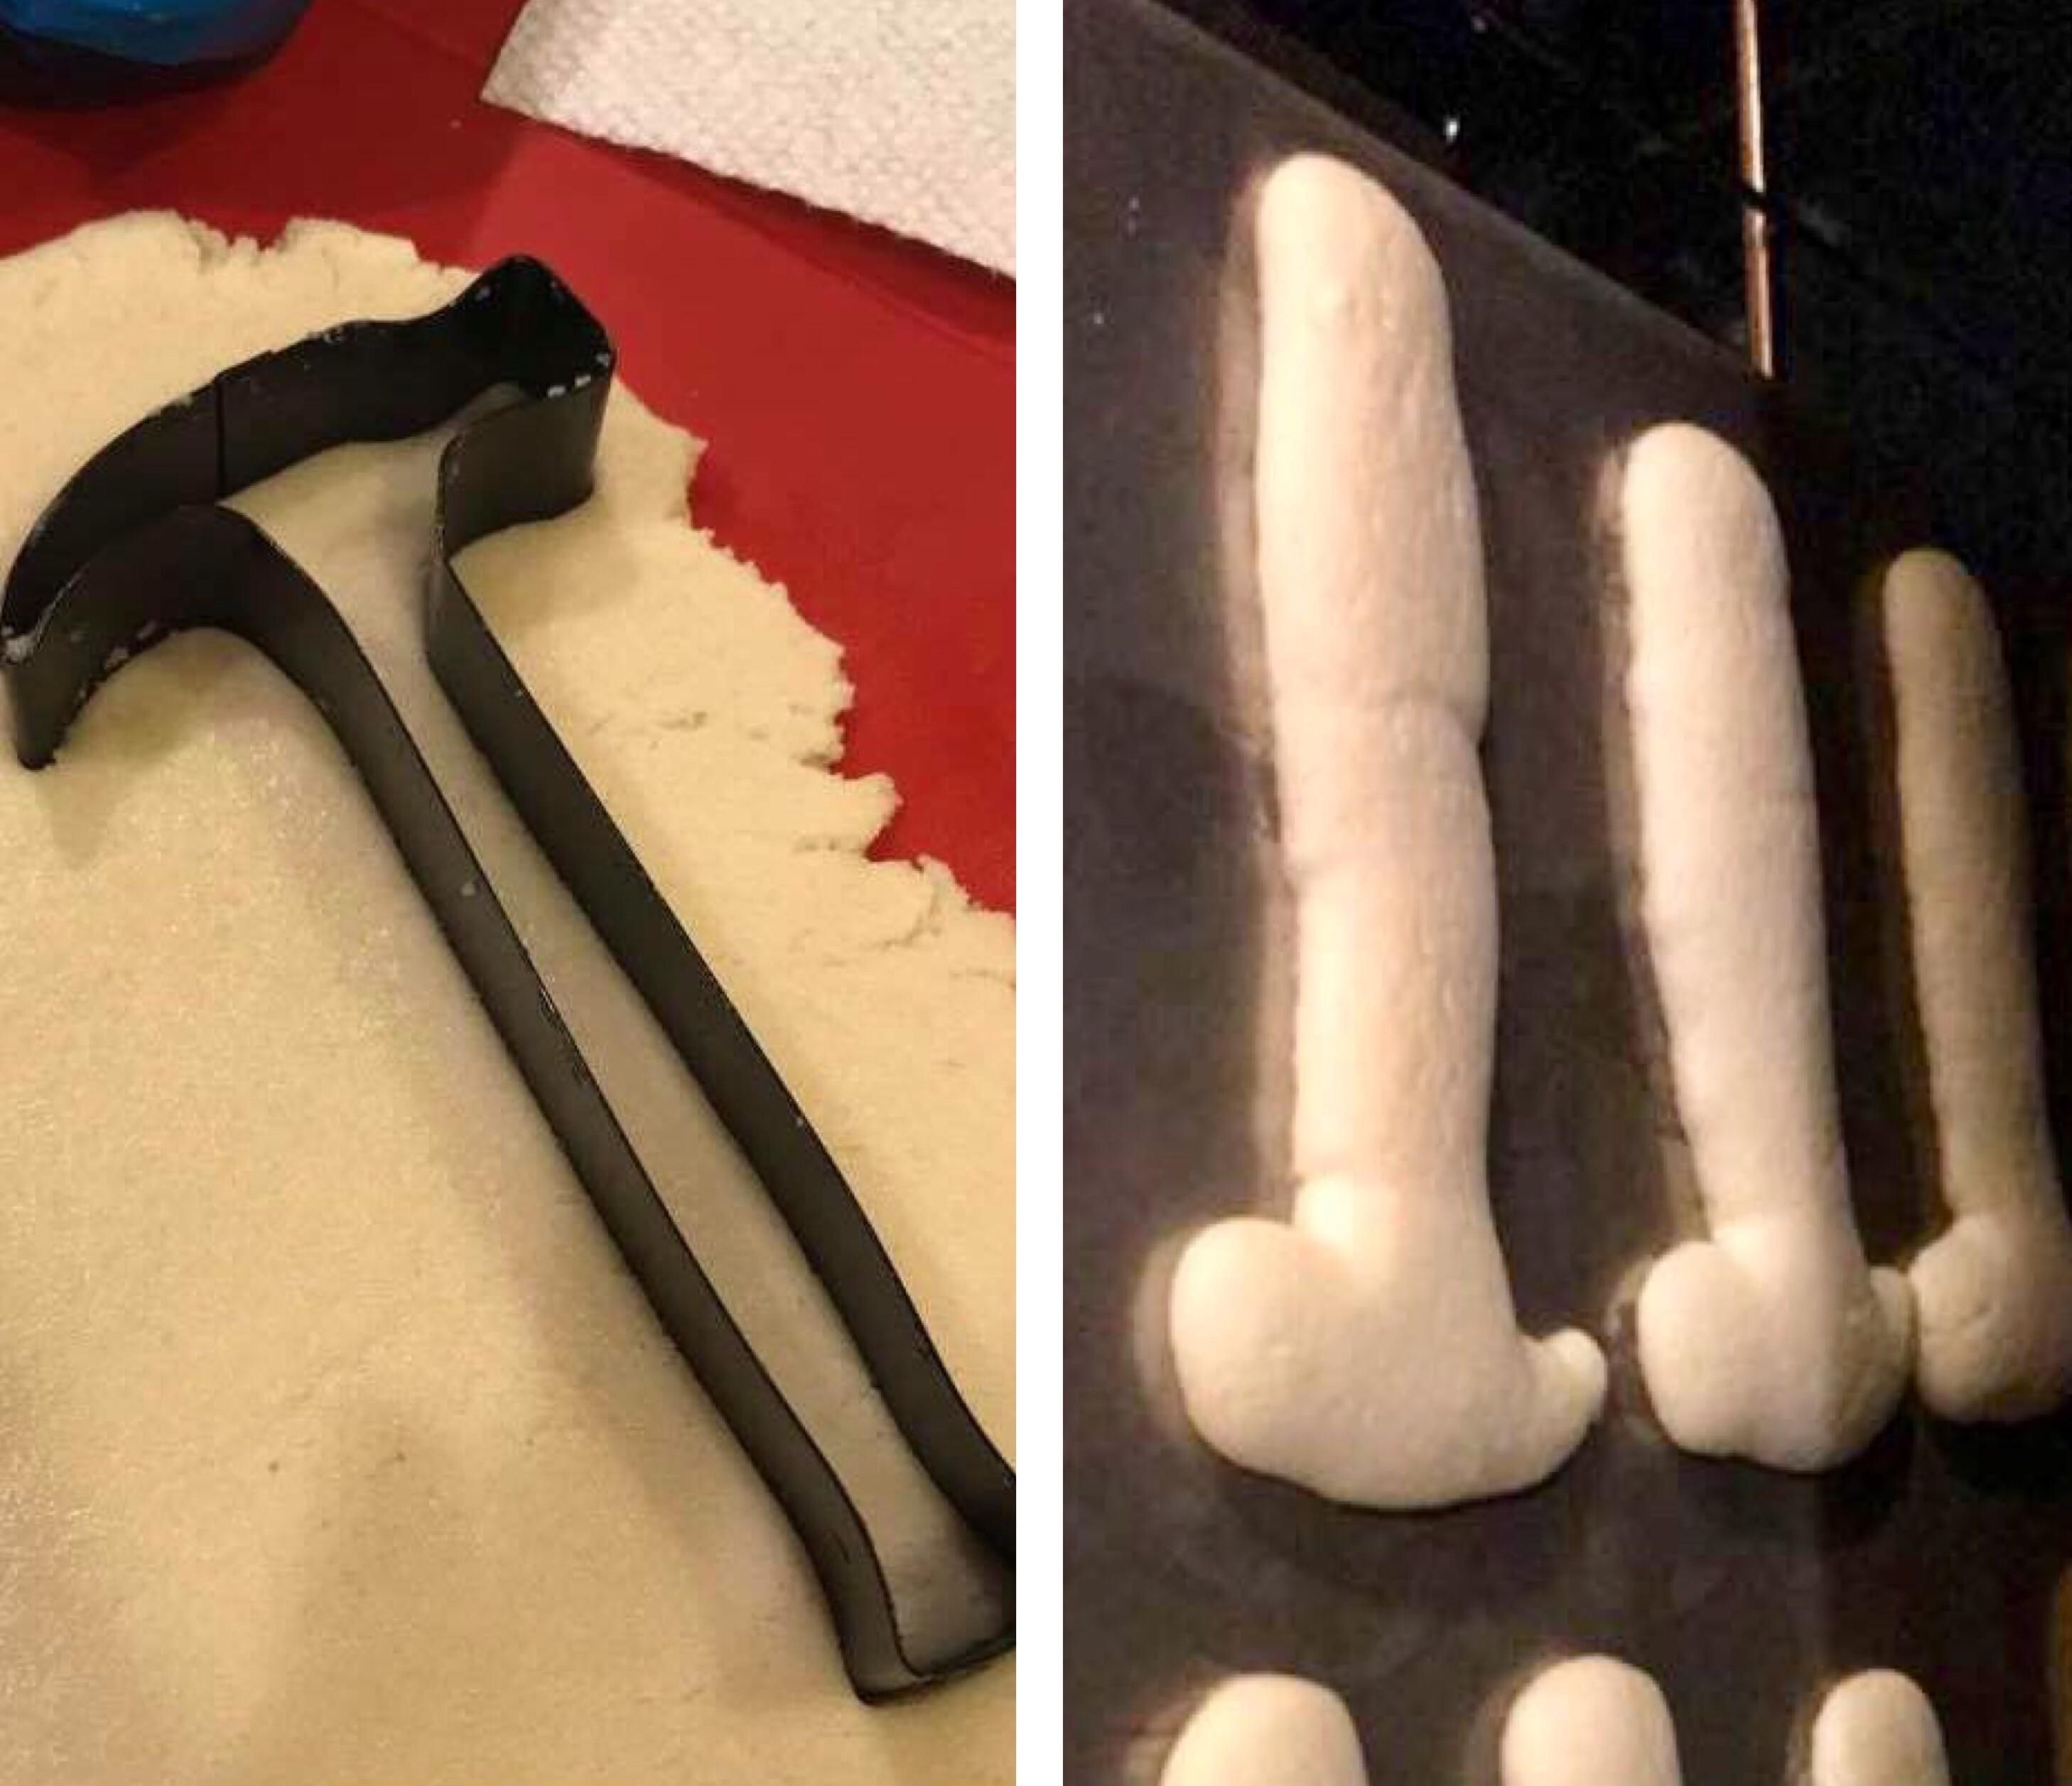 Hammer shaped cookie dough doesn’t turn into Hammer shaped cookies..